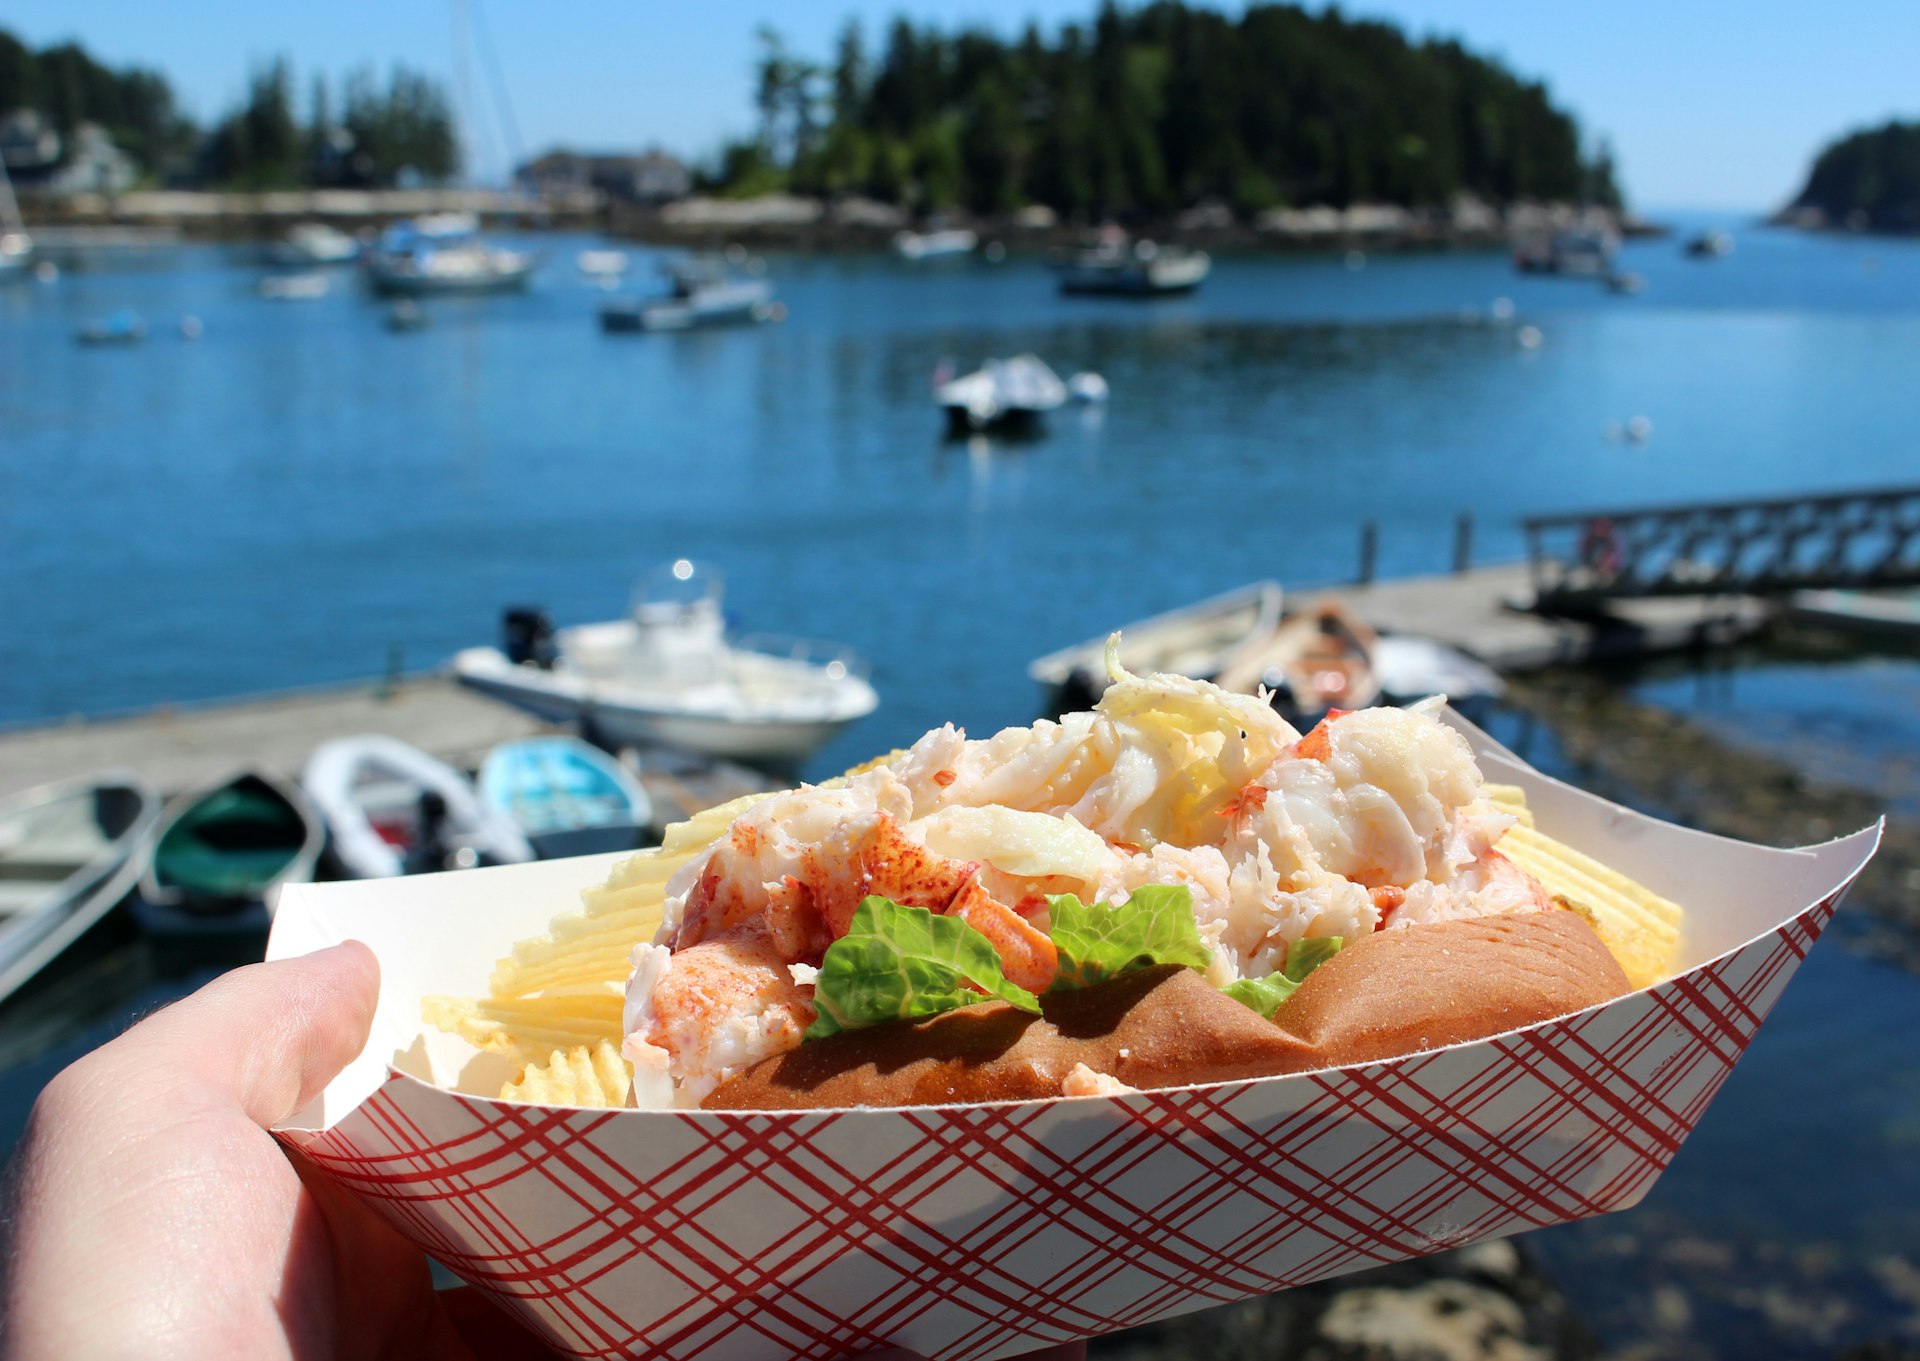 A person holds a small dish of lobster and chips up in front of a waterfront scene